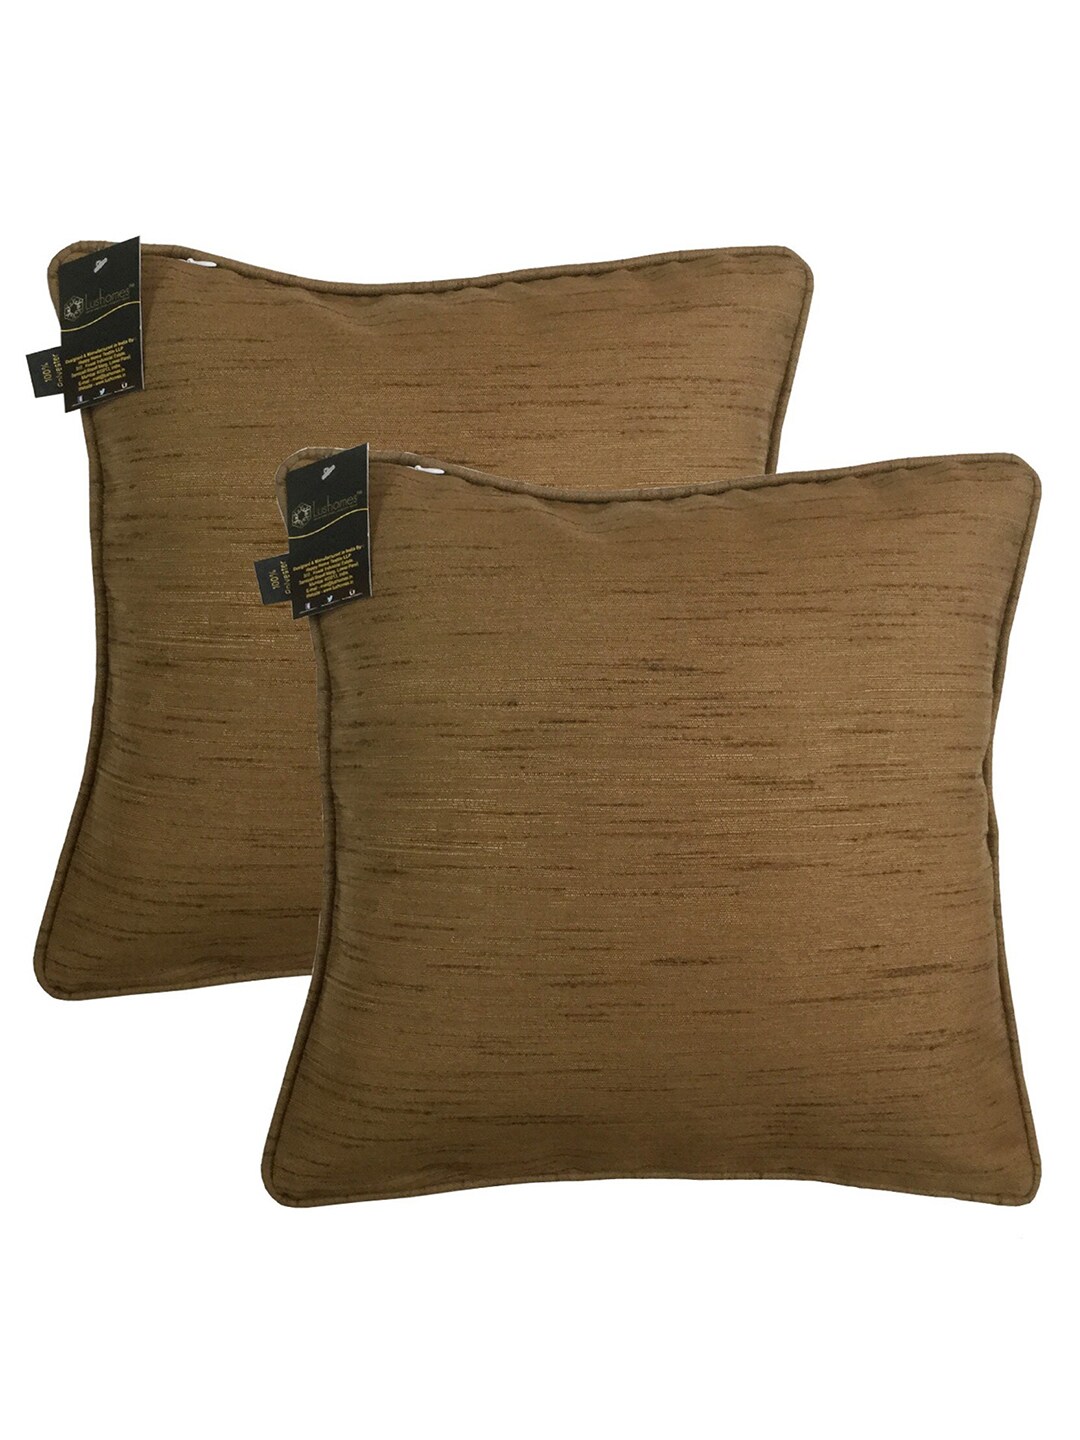 Lushomes Set of 2 Brown Square Cushion Covers Price in India